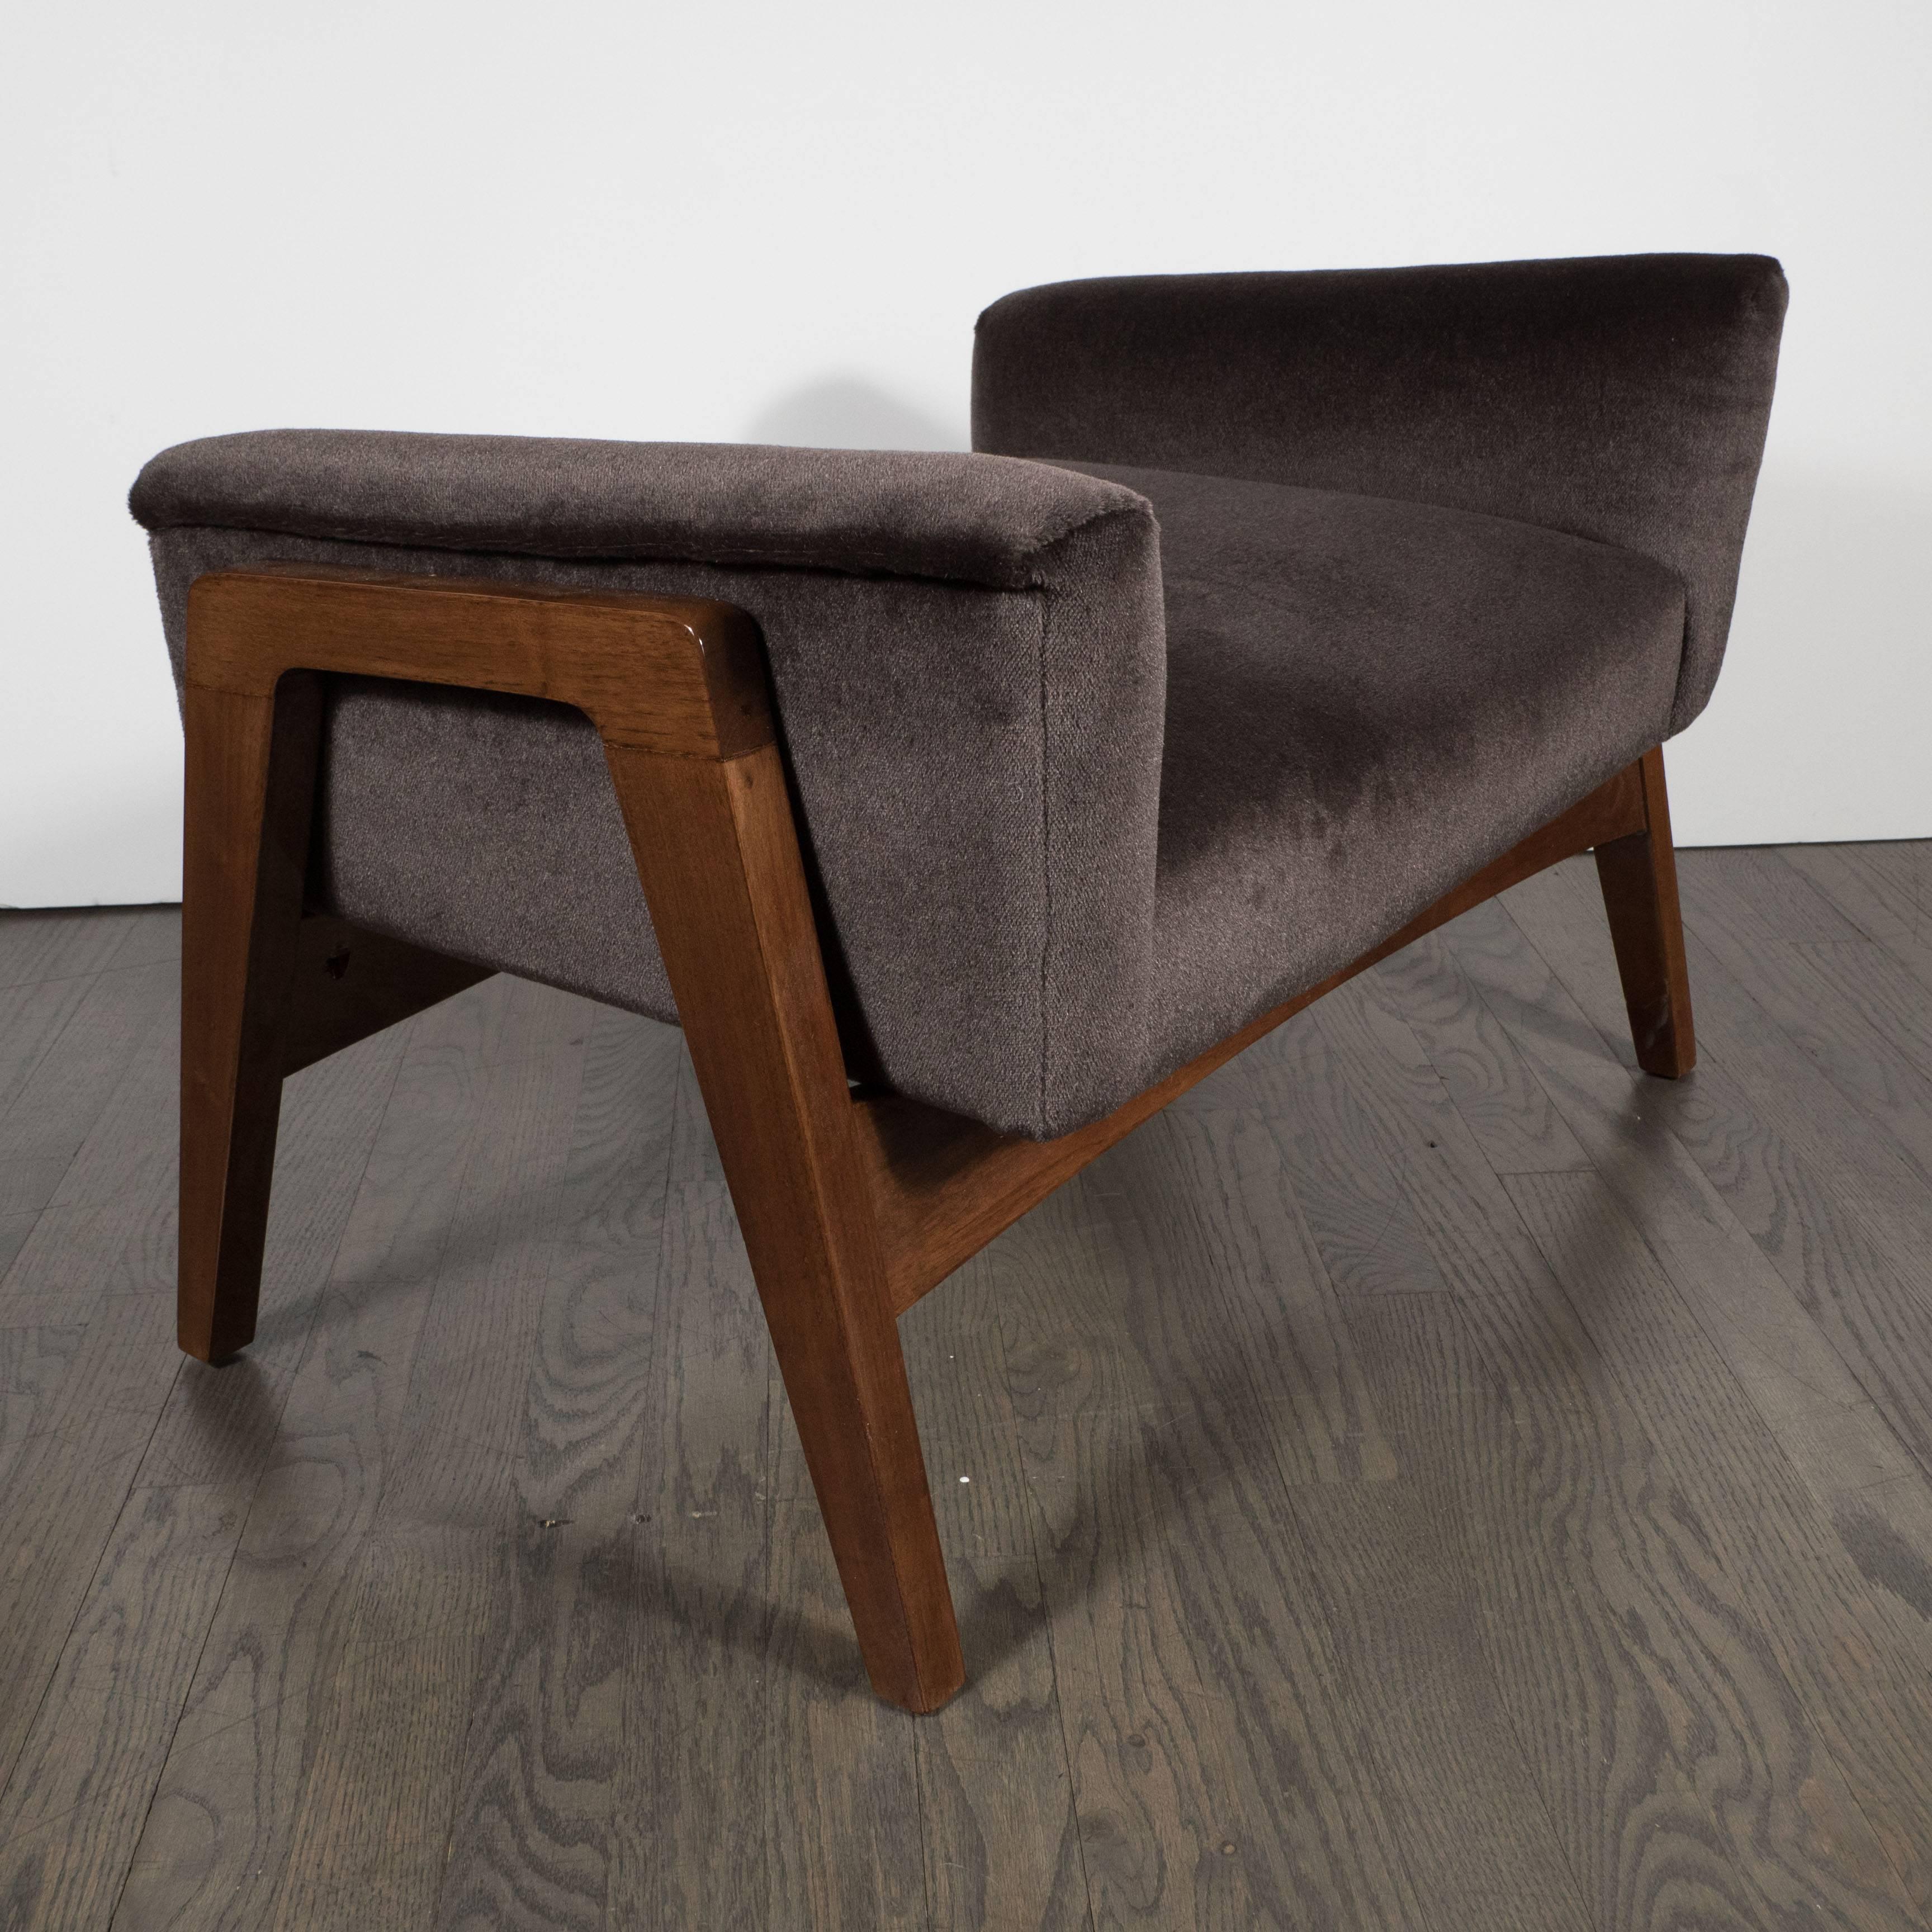 Mid-20th Century Mid-Century Bench /Foot Stool in Chocolate Mohair and Hand-Rubbed Walnut